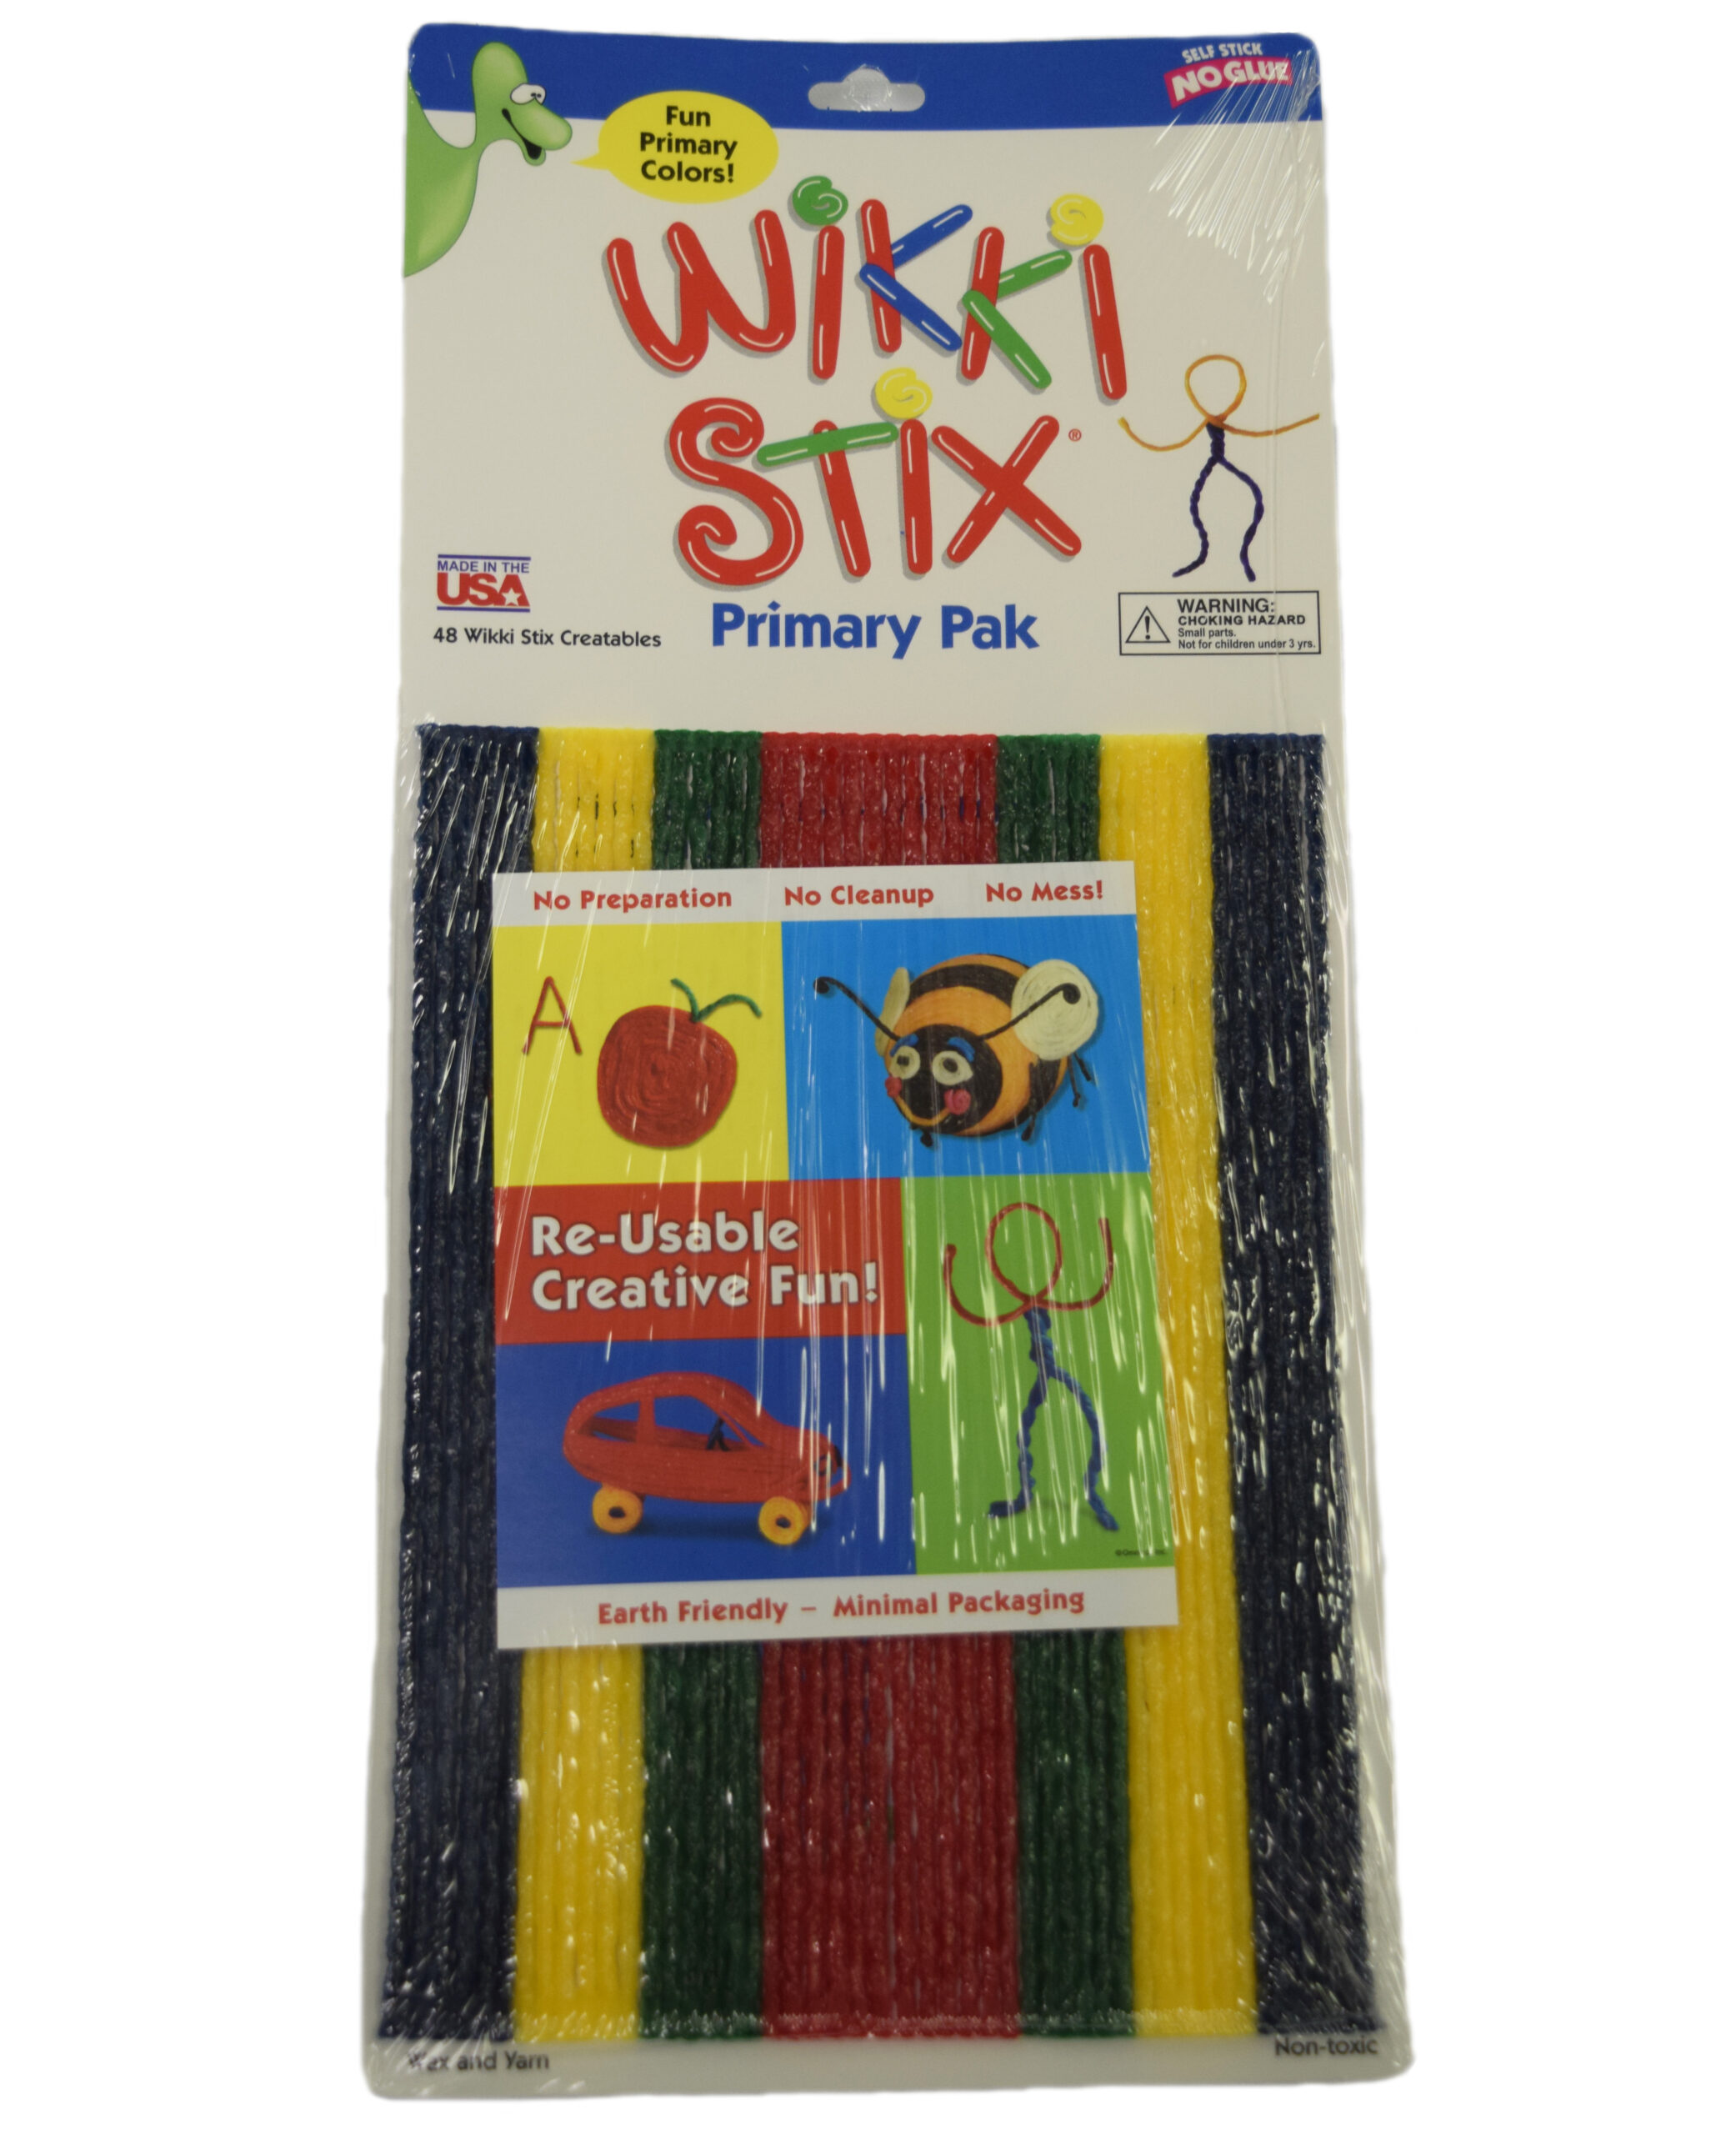 Wikki Stix for Occupational Therapy Uses